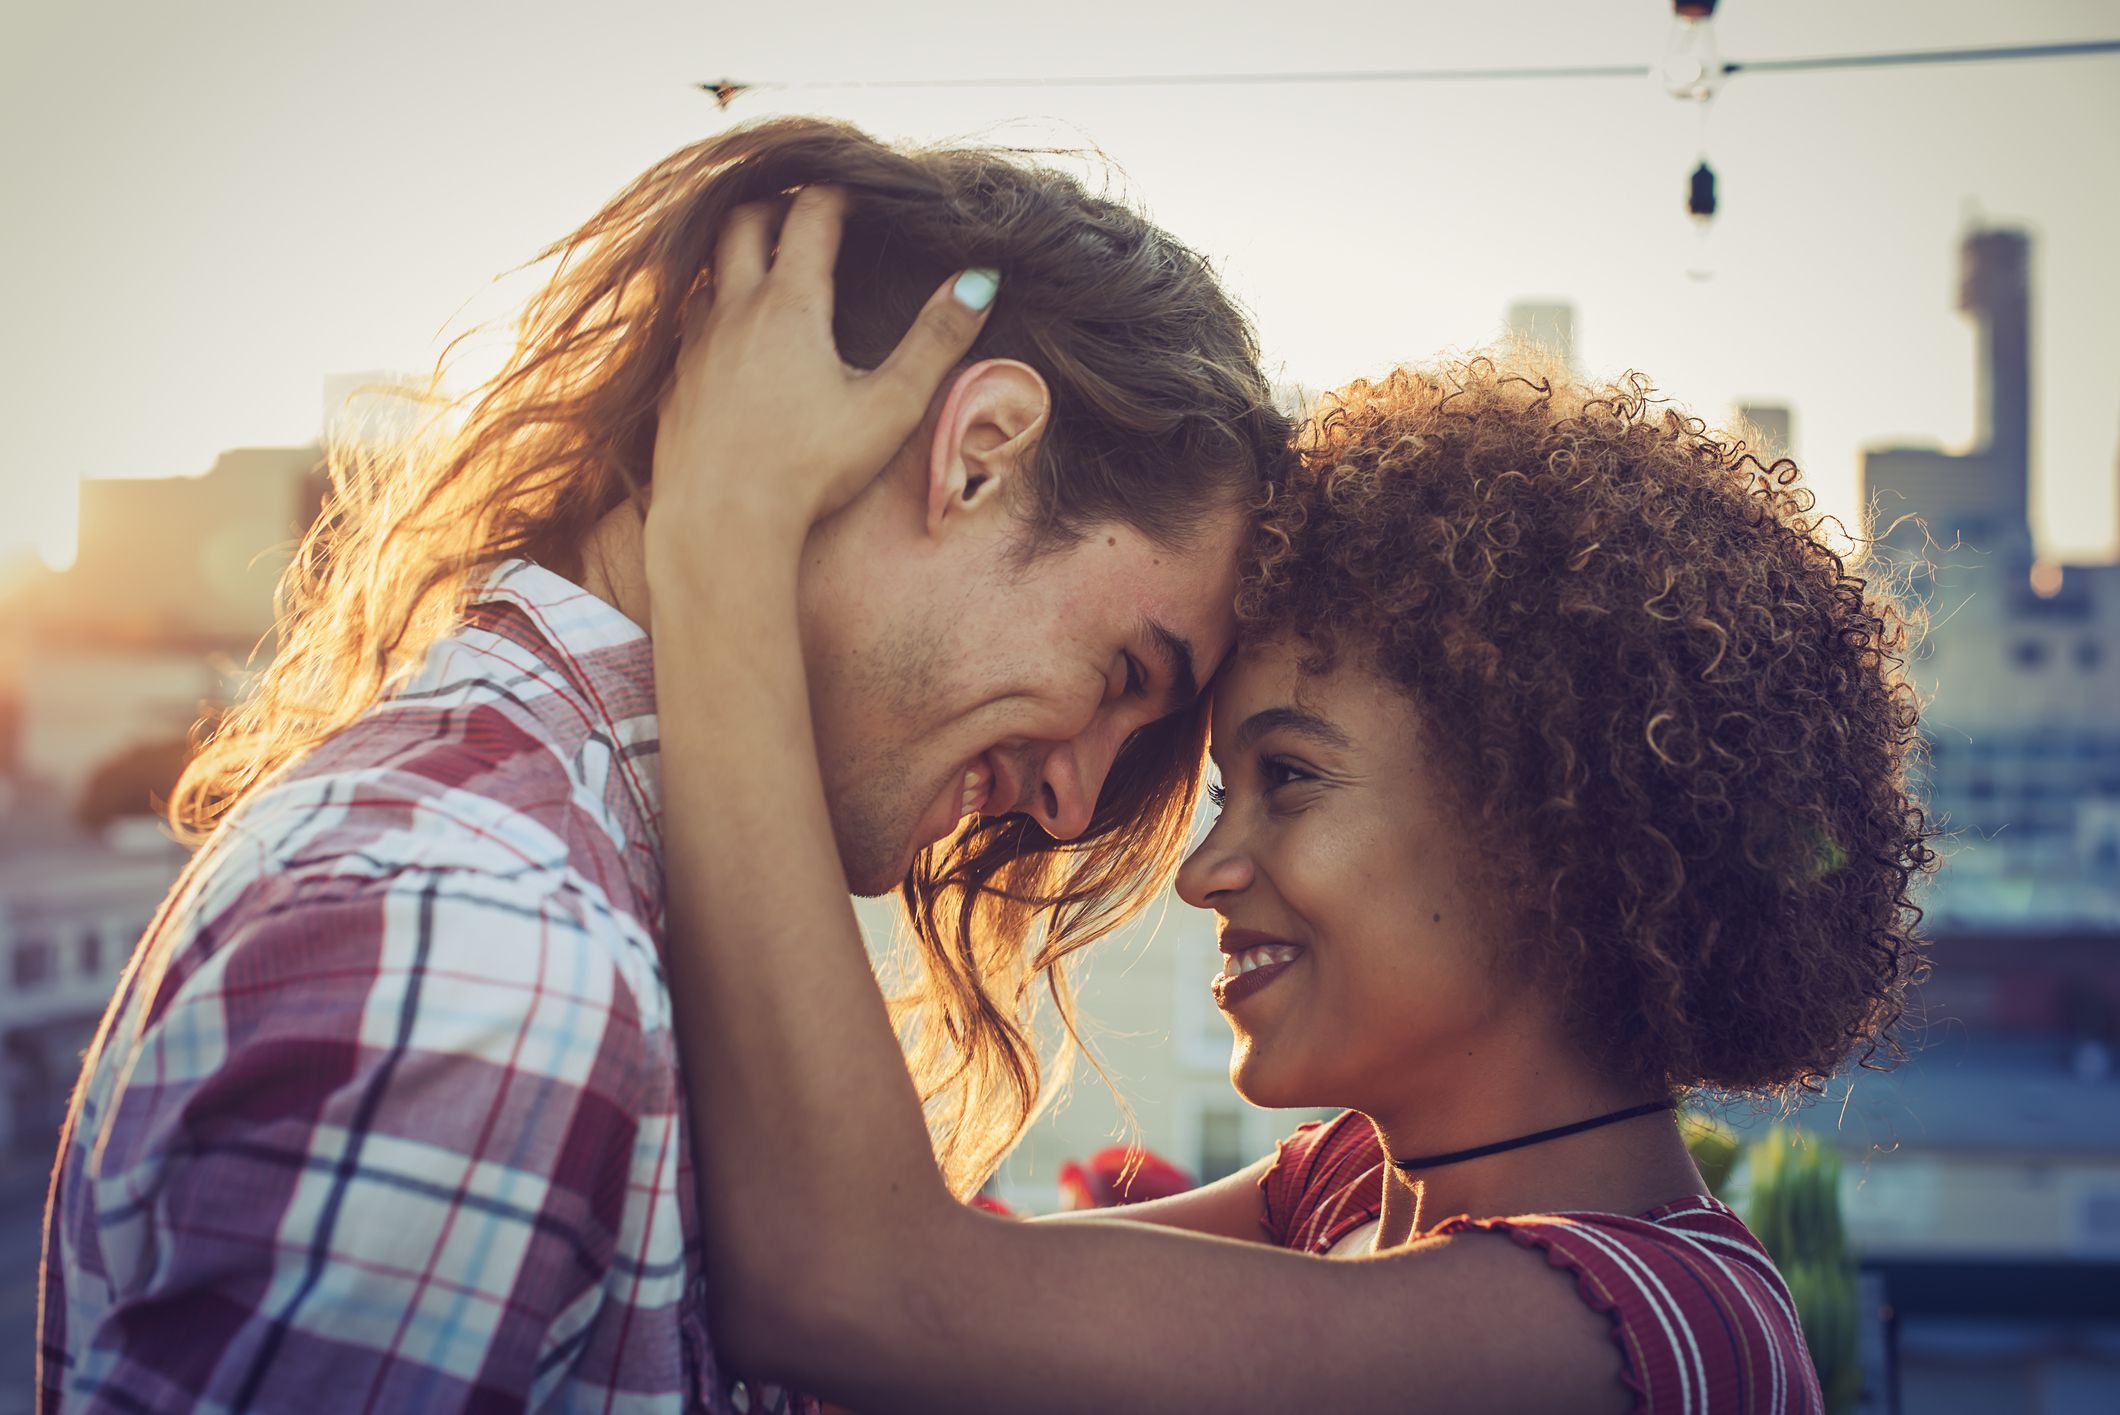 Should You Date Your Best Friend? Experts Explain How to Decide. pic picture picture